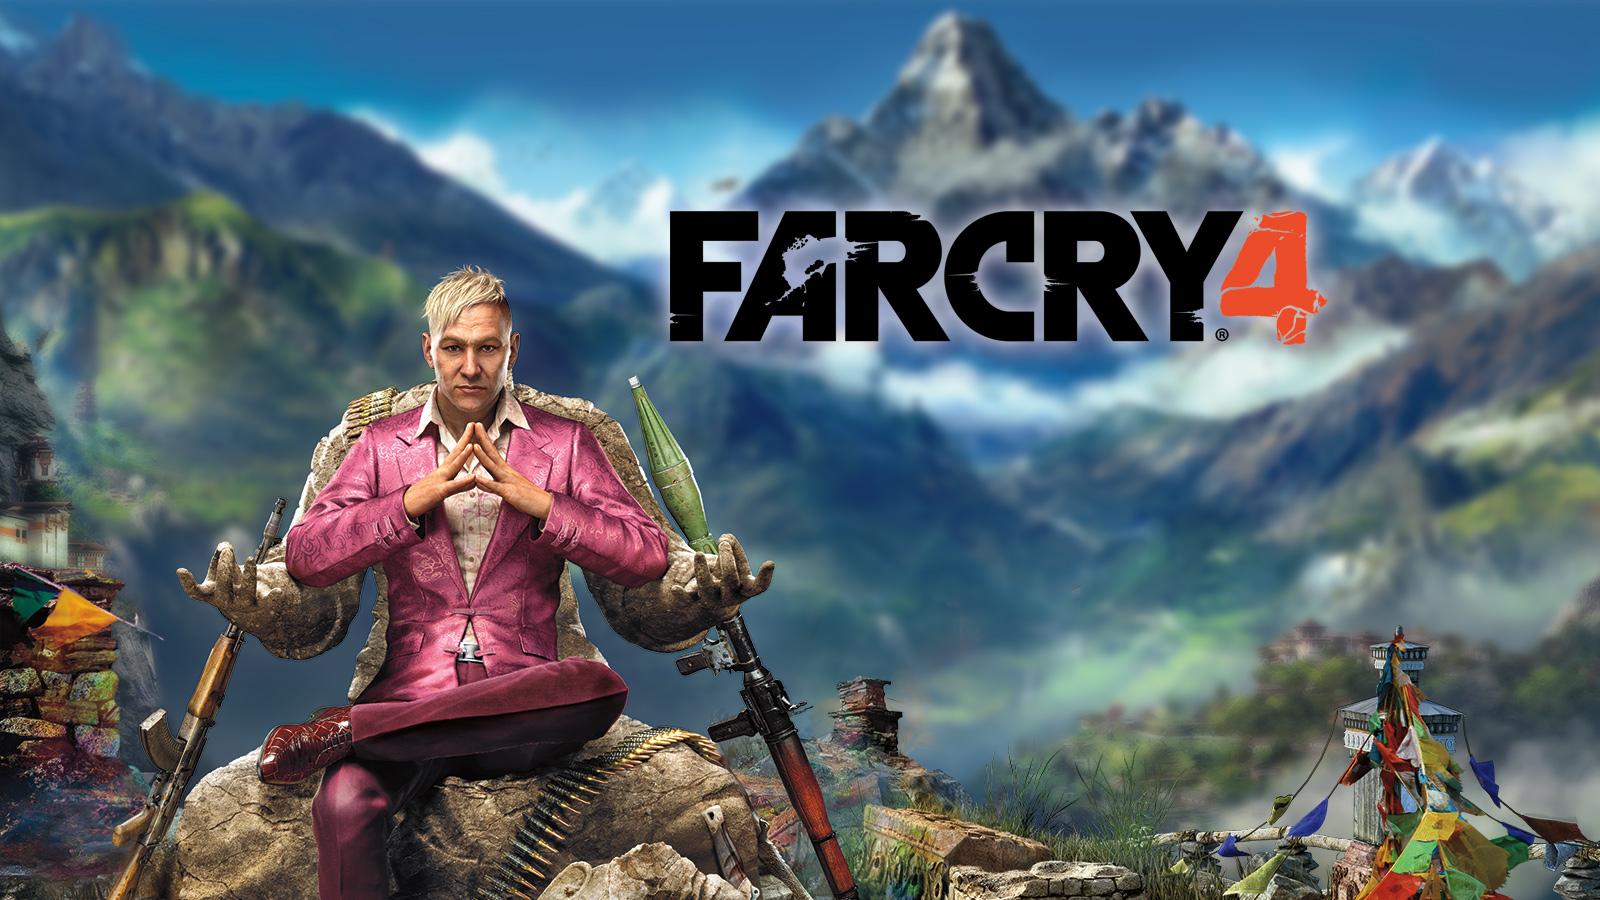 Far cry 4 black screen patch download